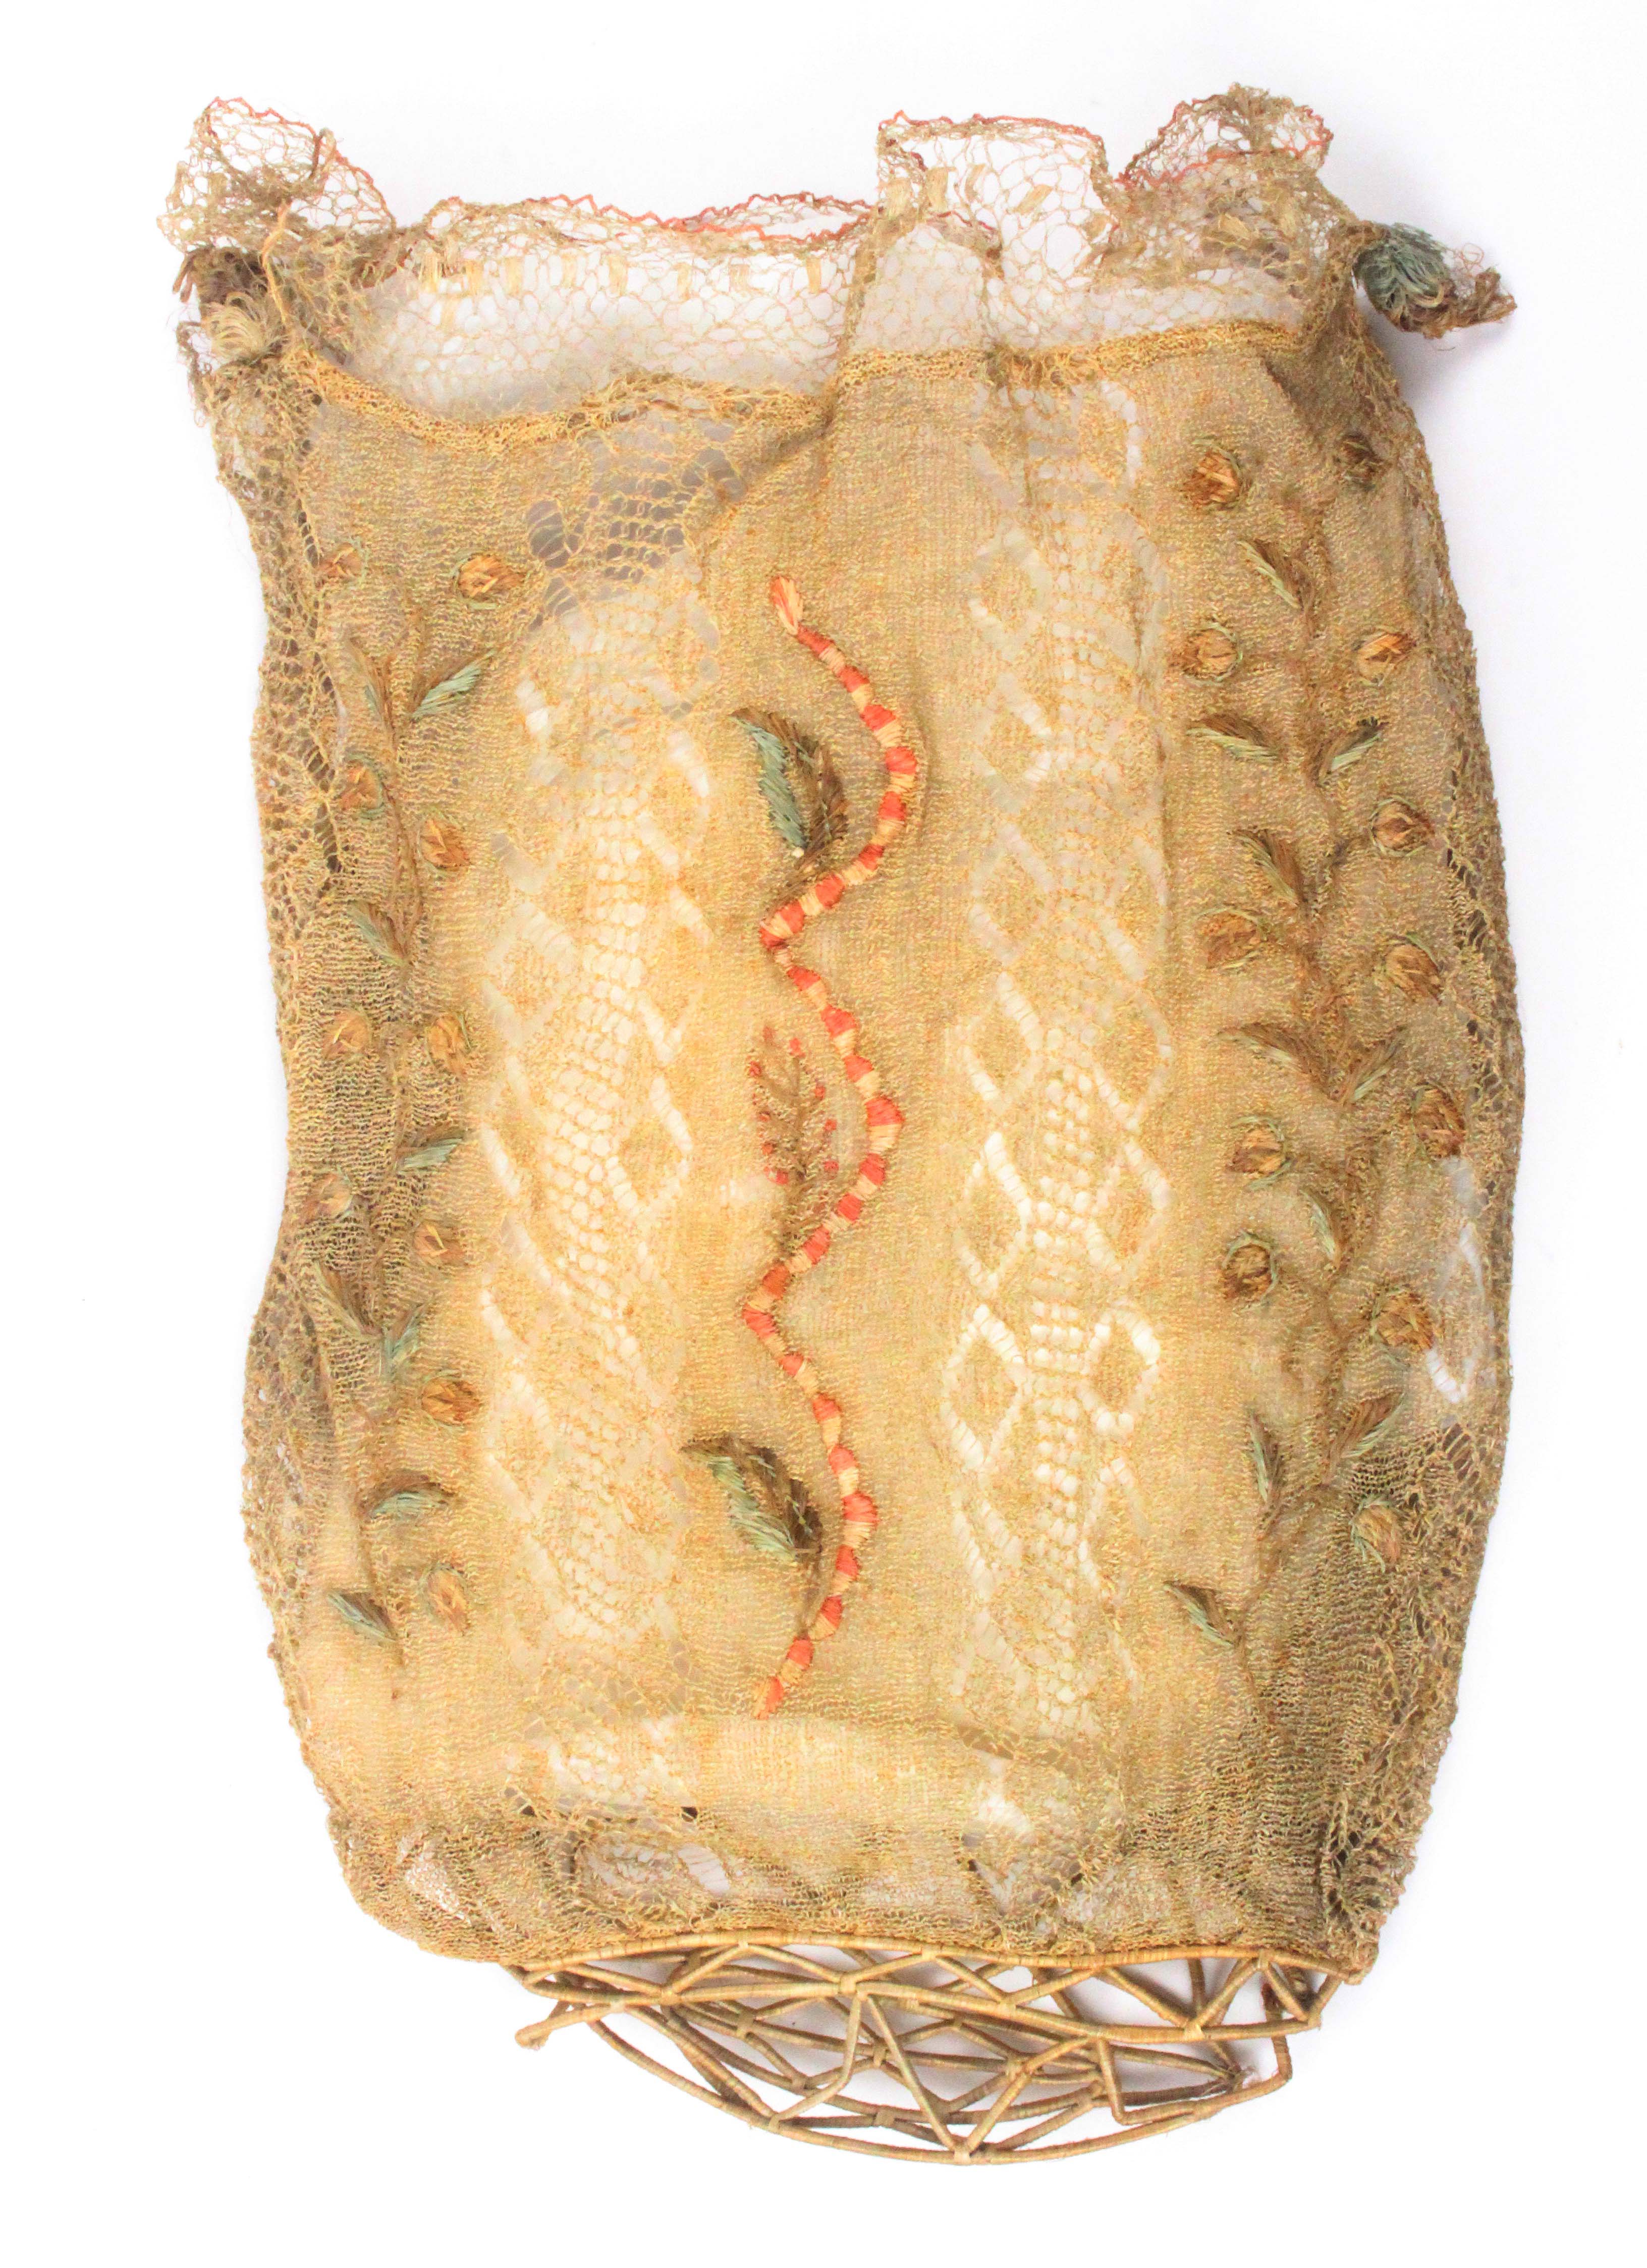 A large late 18th Century / early 19th Century work bag with woven basket base, knitted in aloe - Image 2 of 2